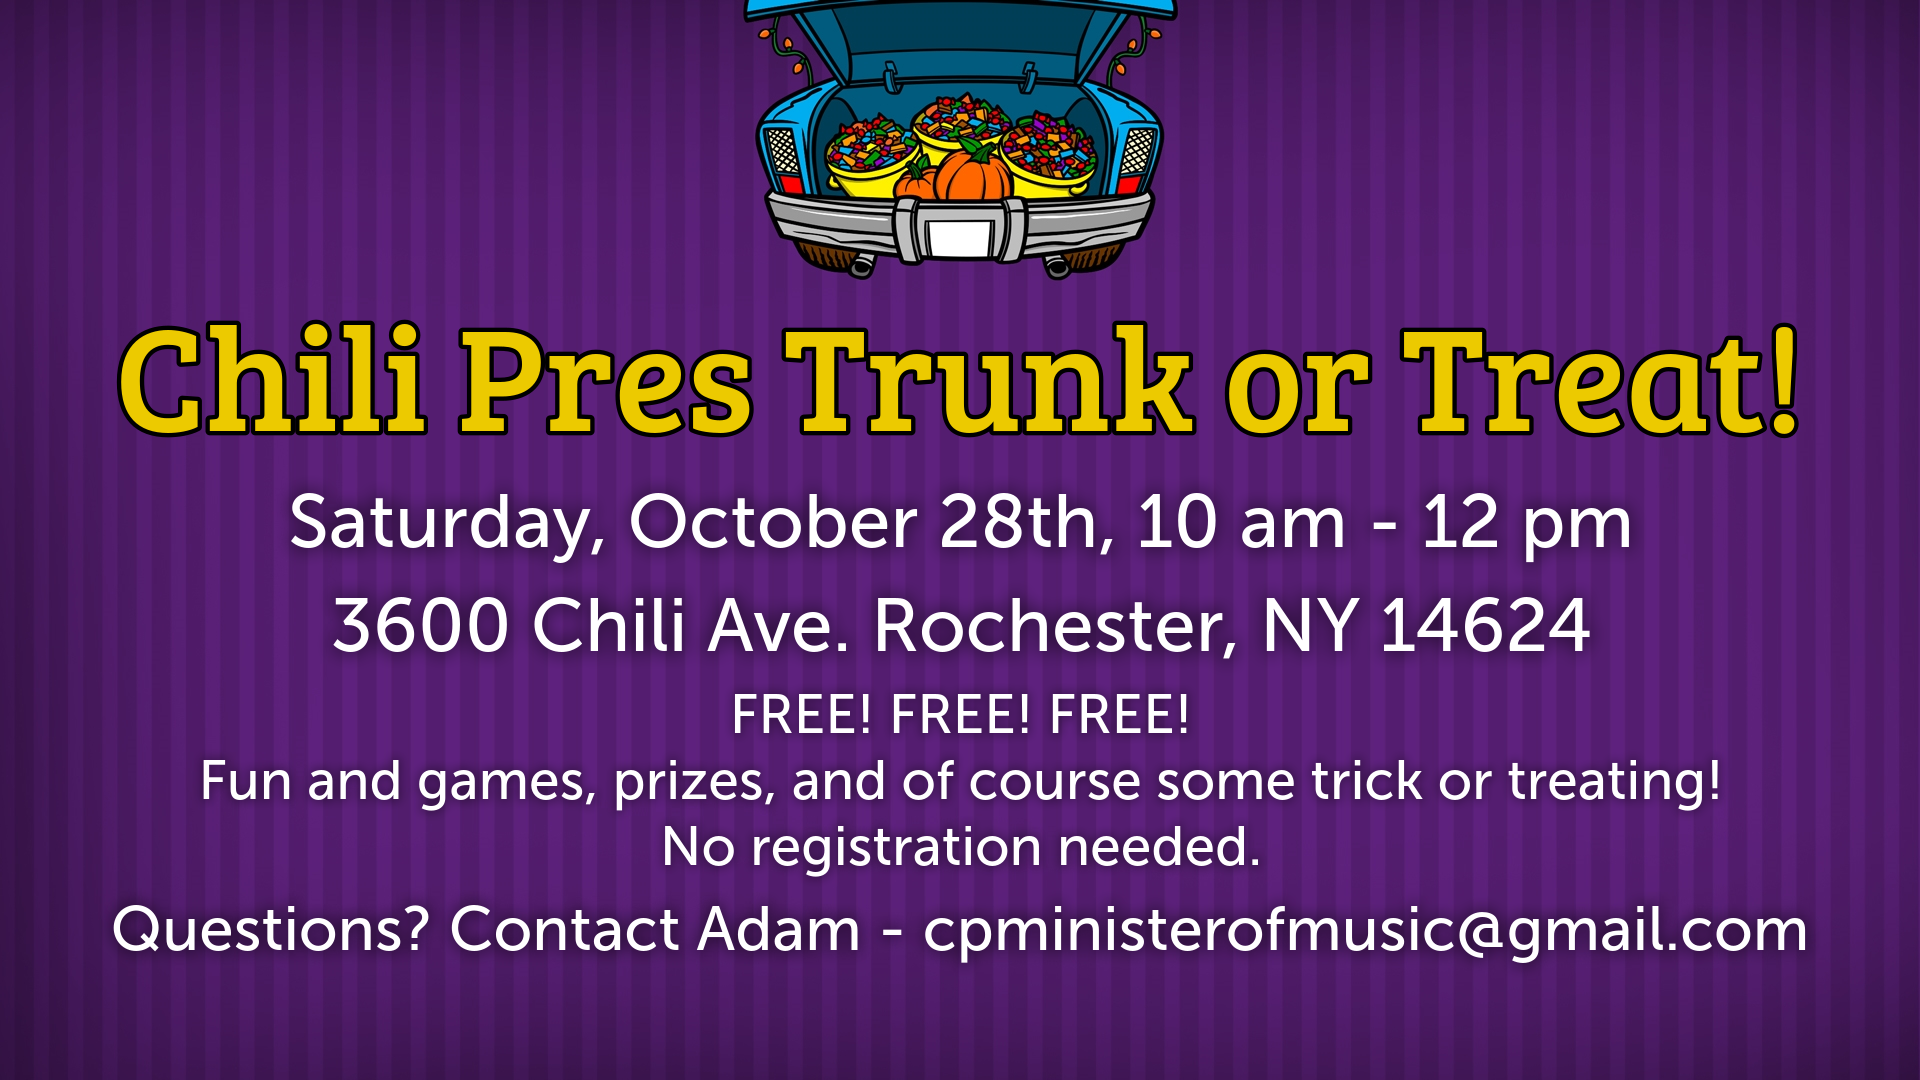 Trunk of Treat
3600 Chili Avenue
Rochester, NY 14624
Saturday, October 28, 2023
10 AM to 12 PM